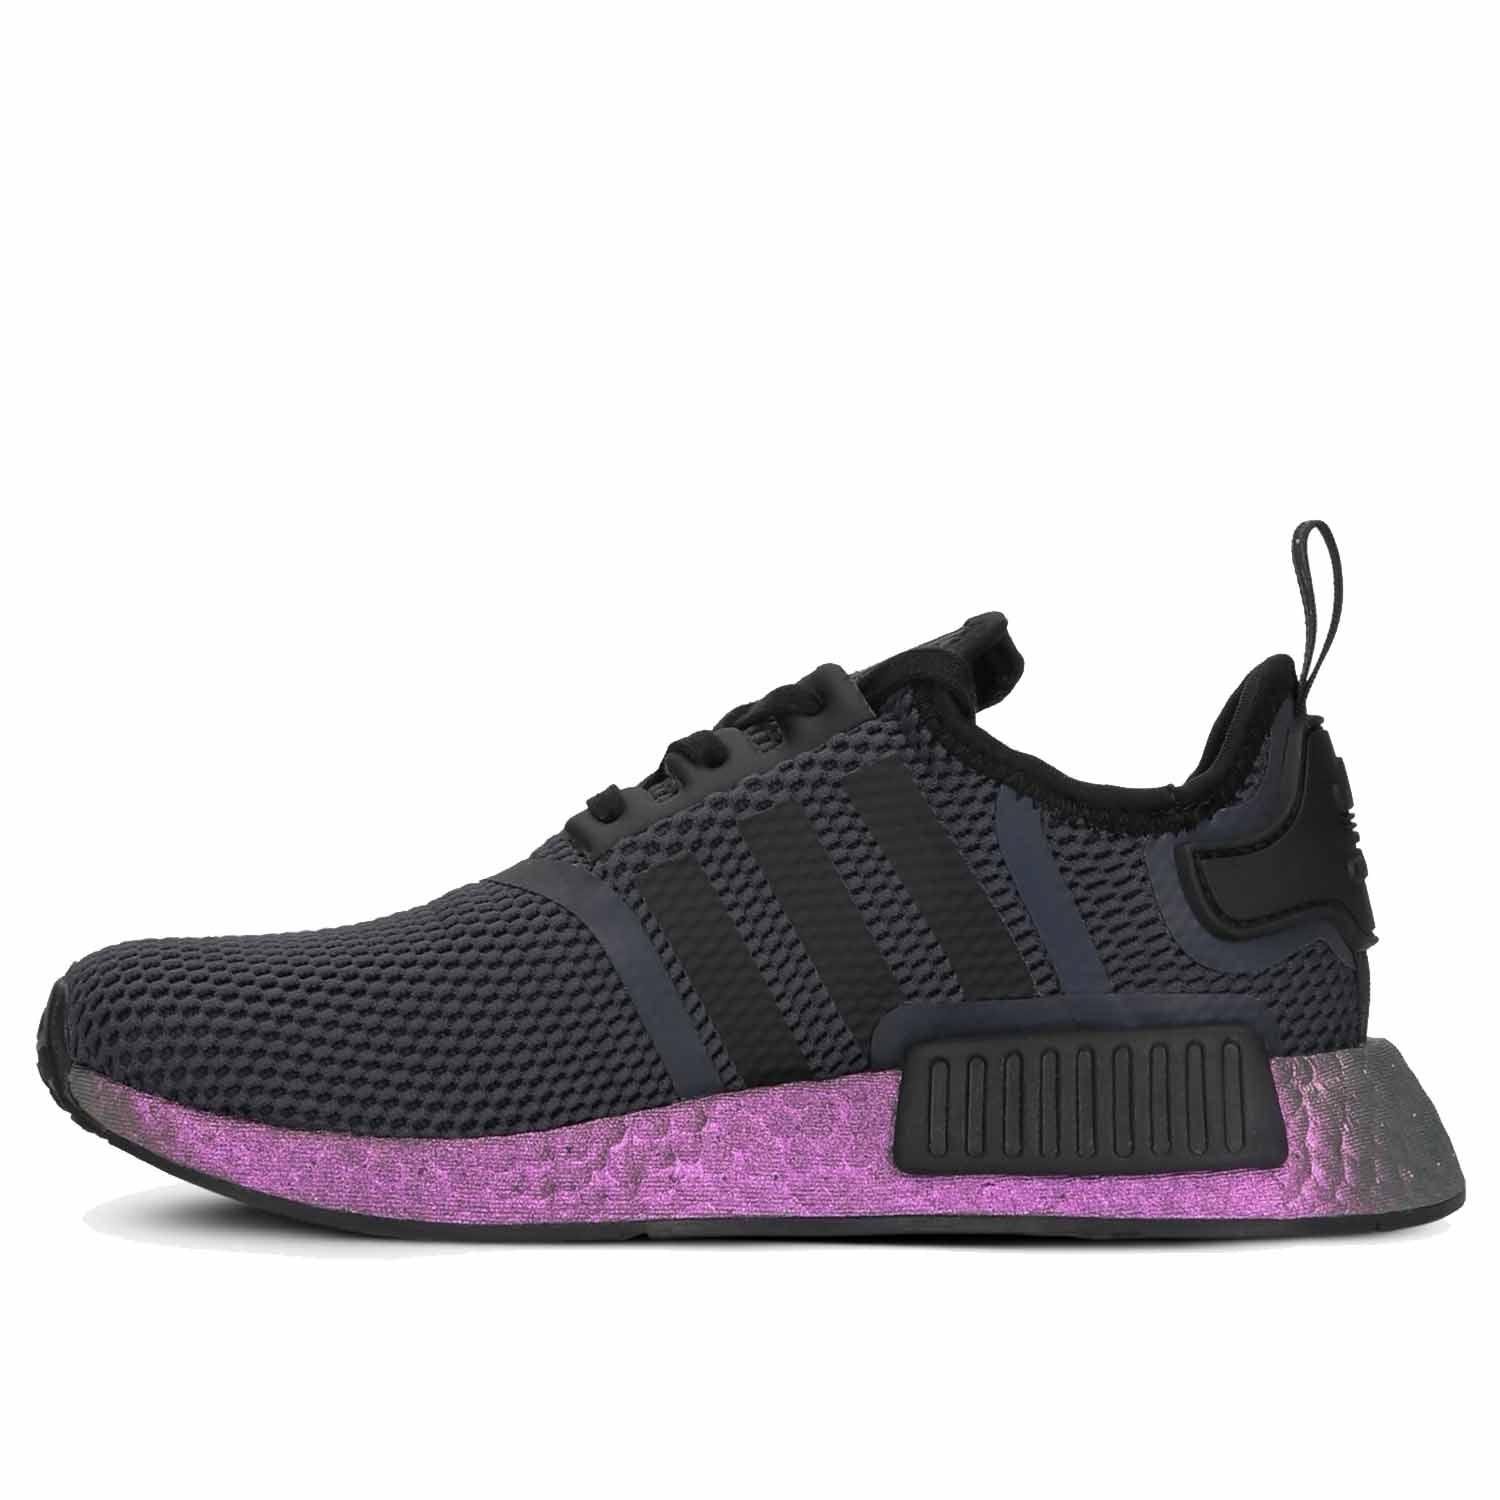 enhed Genre Sophie Buy Women's Adidas NMD R1 Core Black Shoes in USA - Como Store